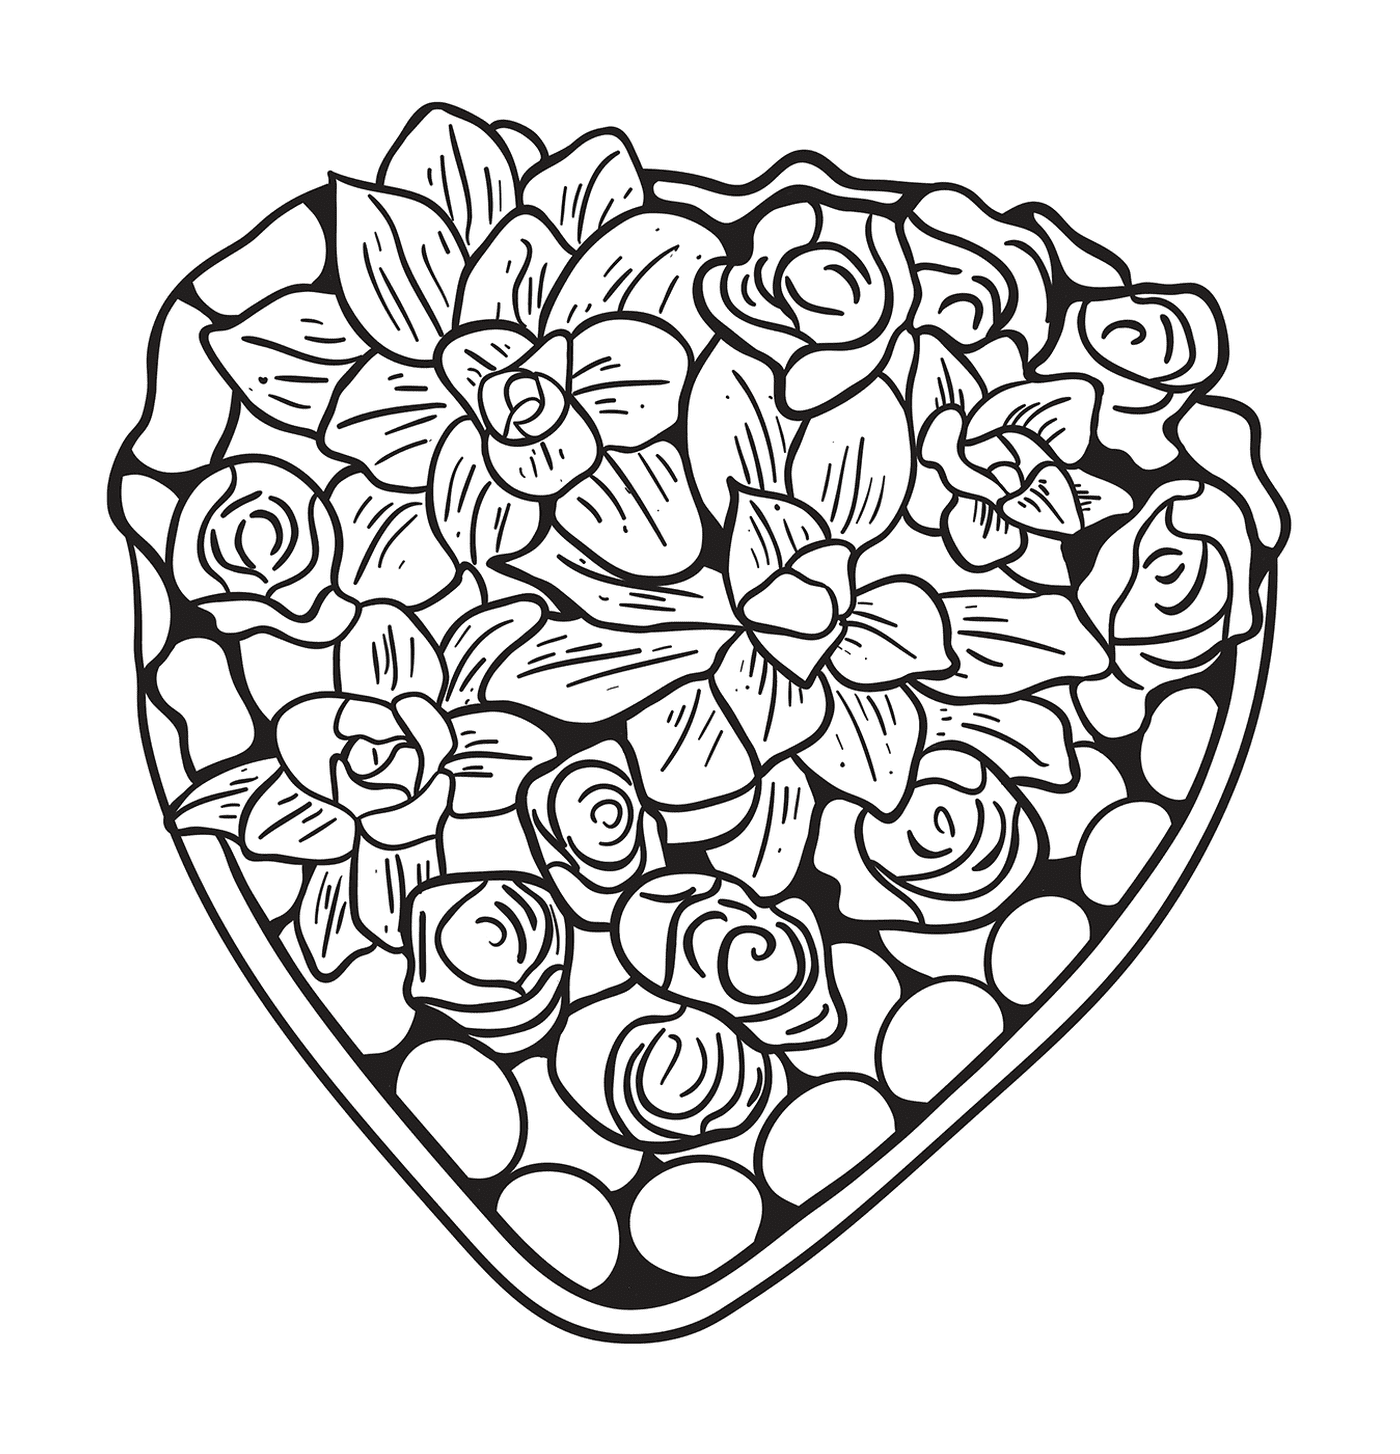  Nice heart composed of flowers and roses 